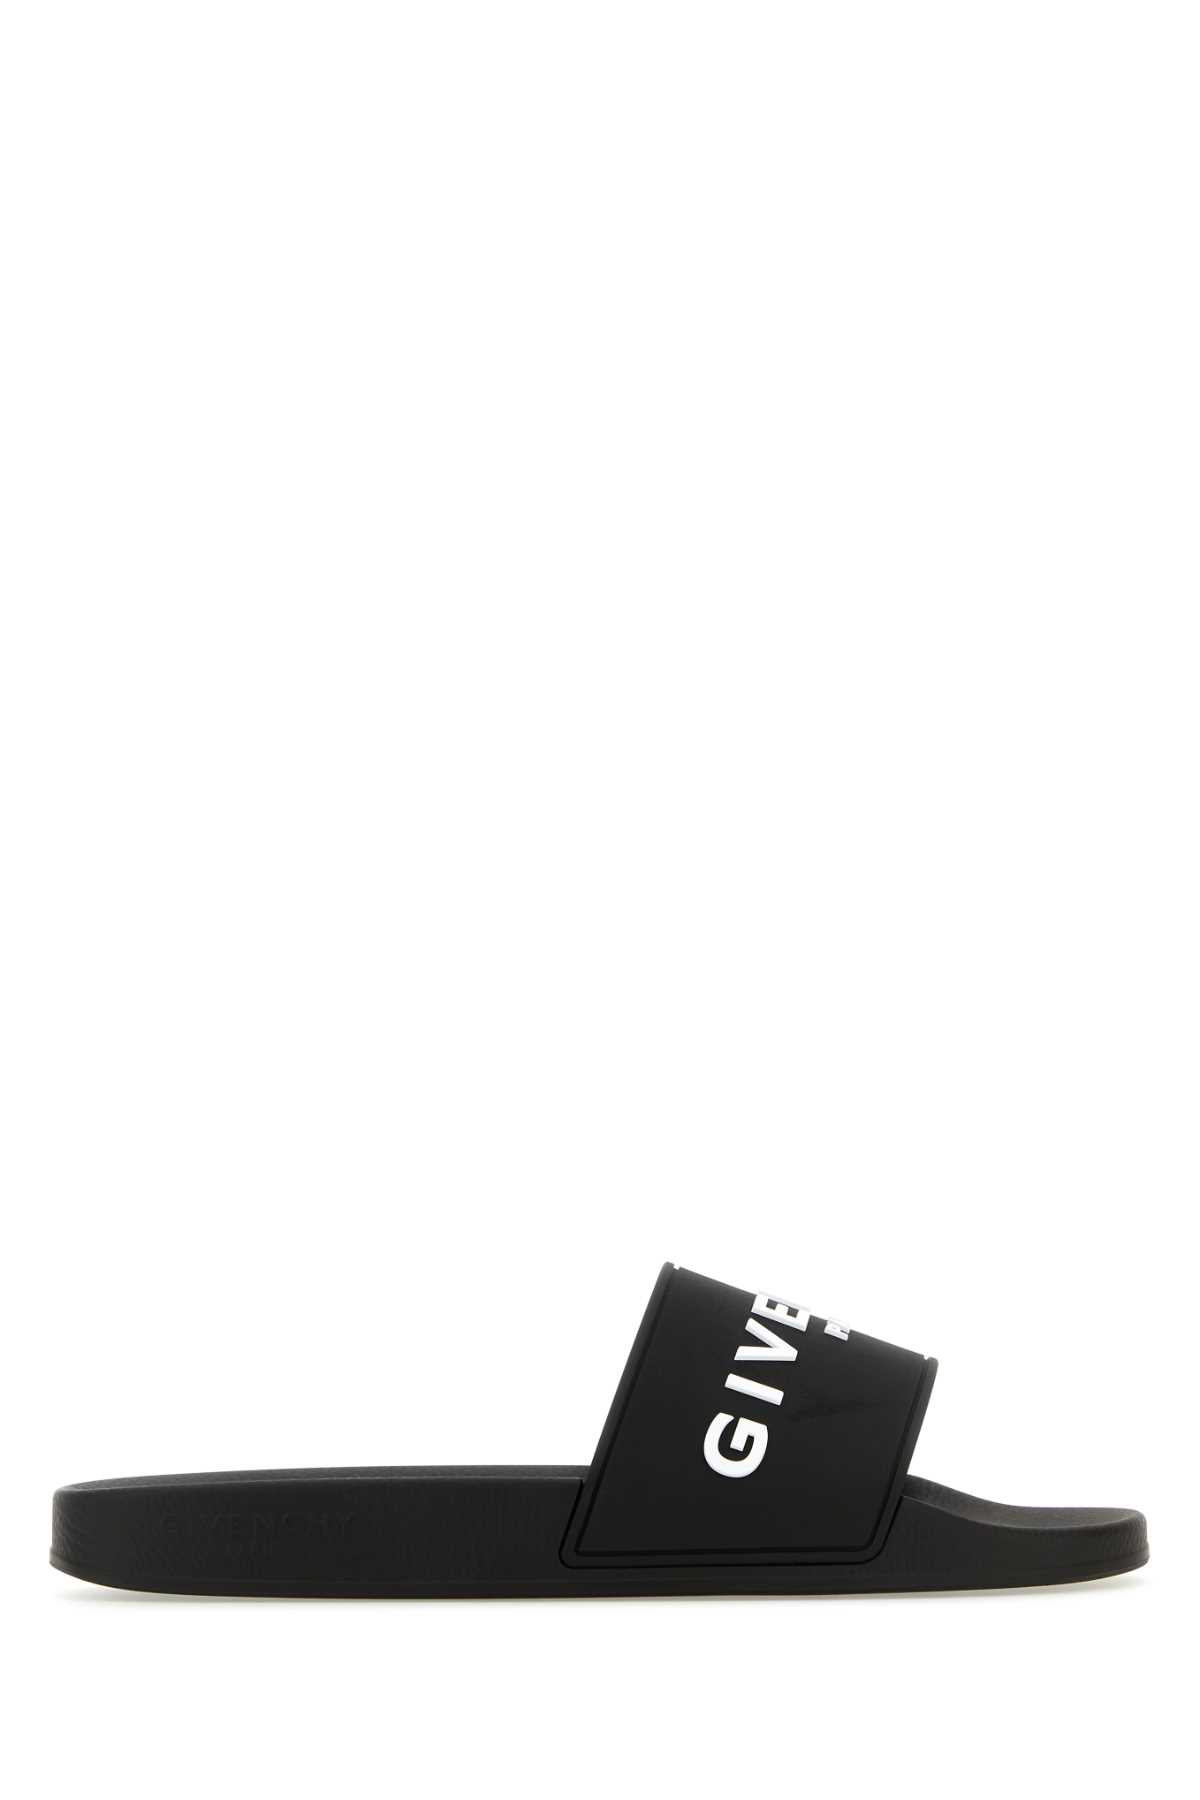 Shop Givenchy Black Rubber Slippers